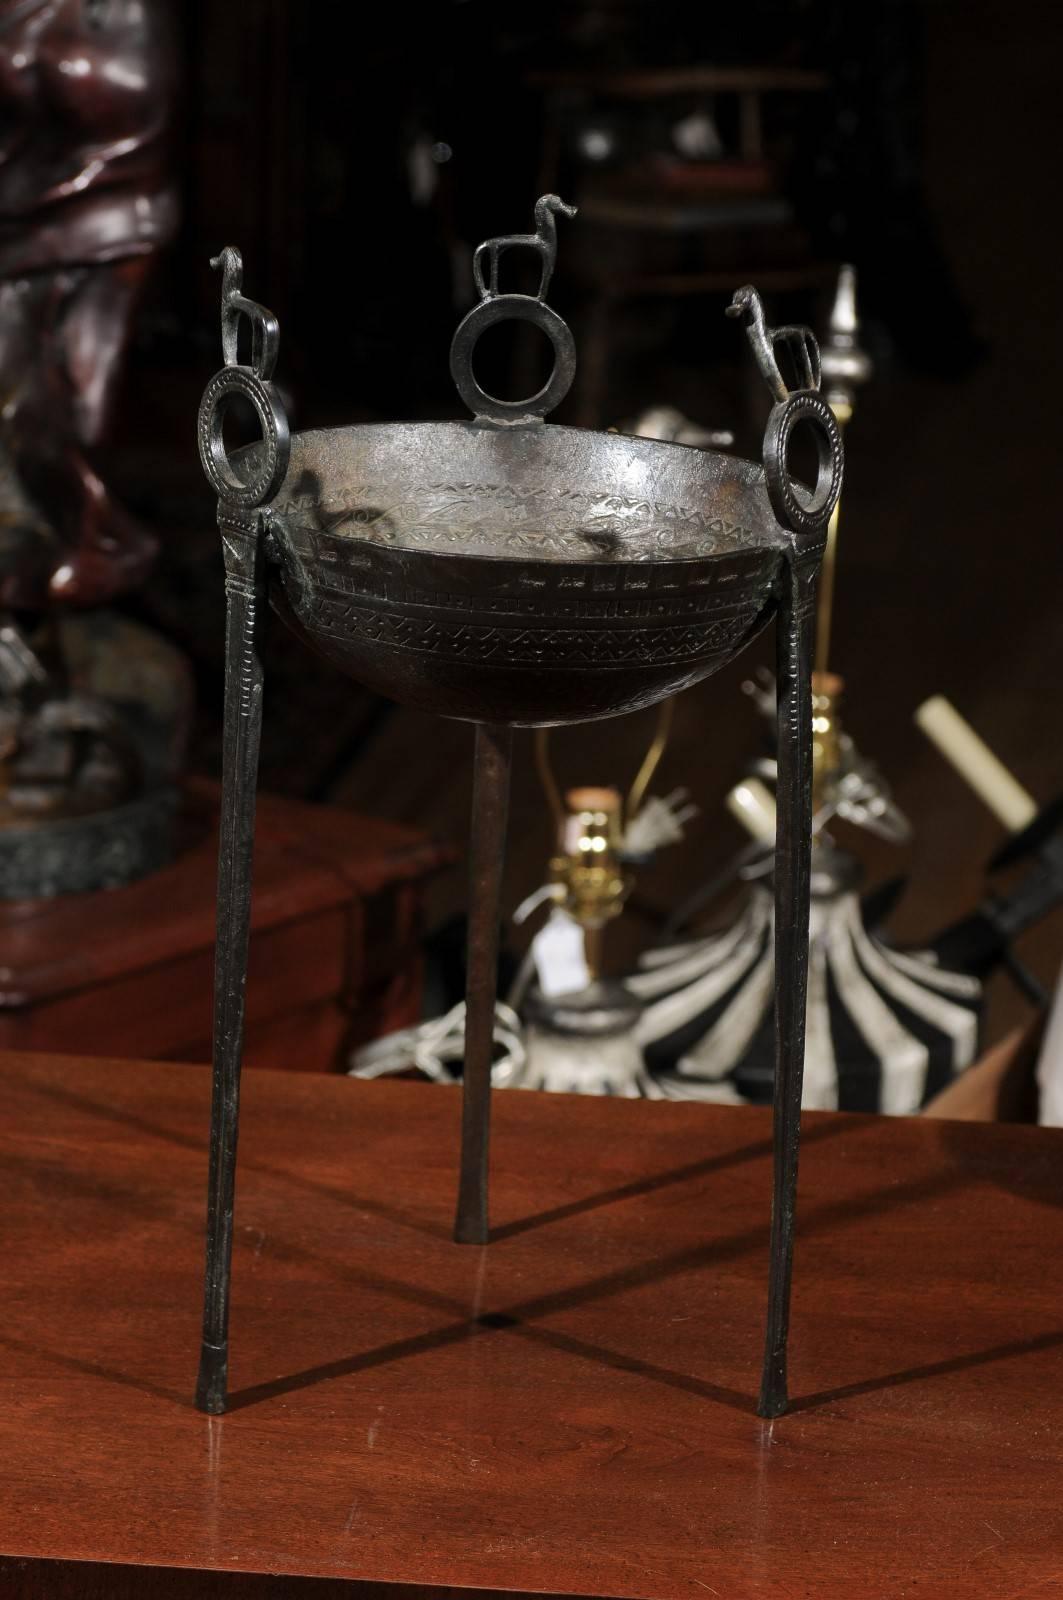 Neoclassical 20th century Grecian etched bronze tripod with stylized horse ornaments. Tripods are a symbol of achievement and token of gratitude between hosts and guests.